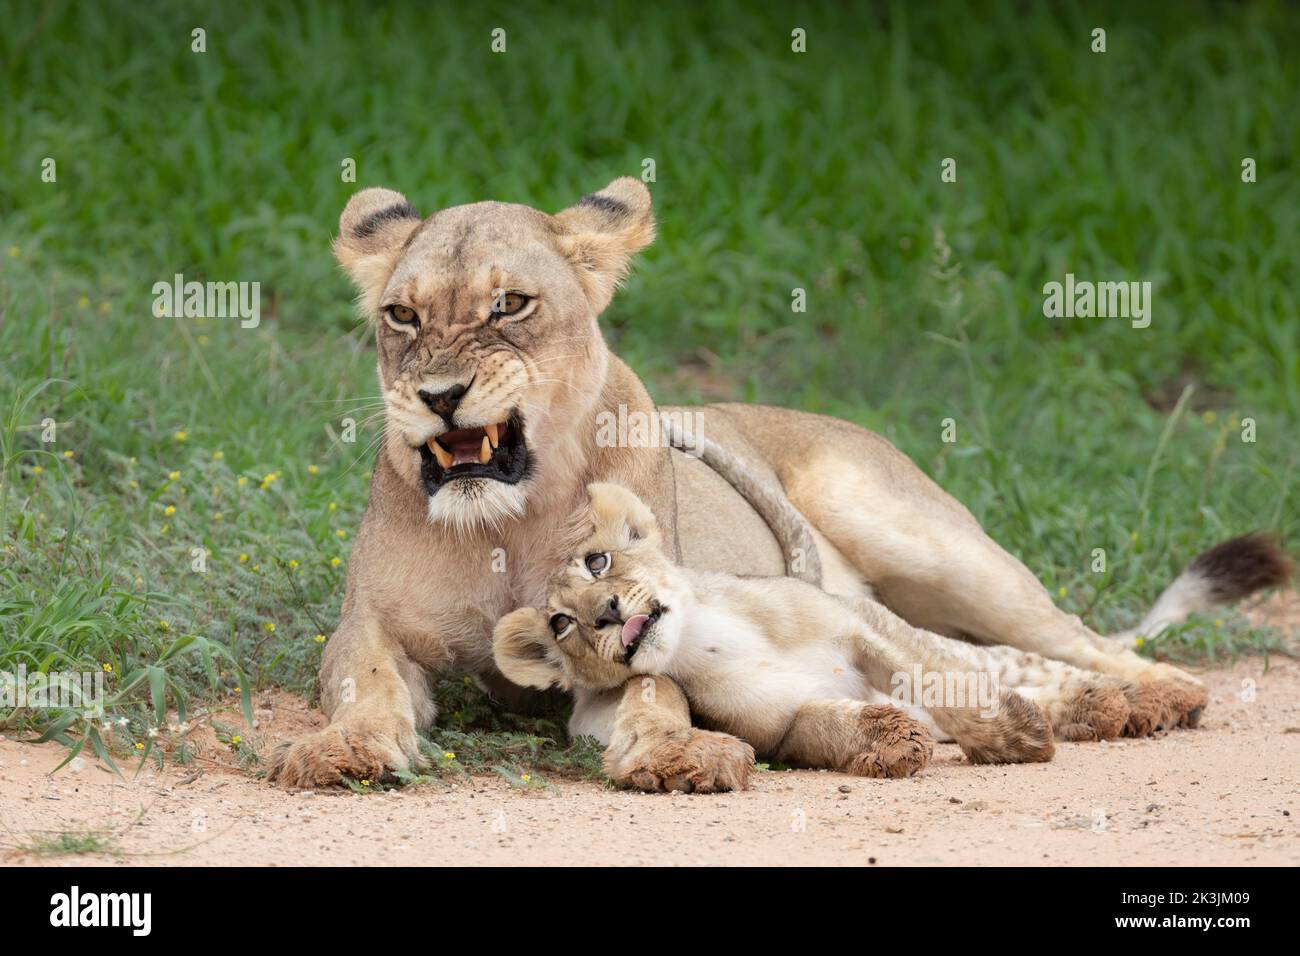 Lioness (Panthera leo) with cub, Kgalagadi transfrontier park, Northern Cape, South Africa Stock Photo